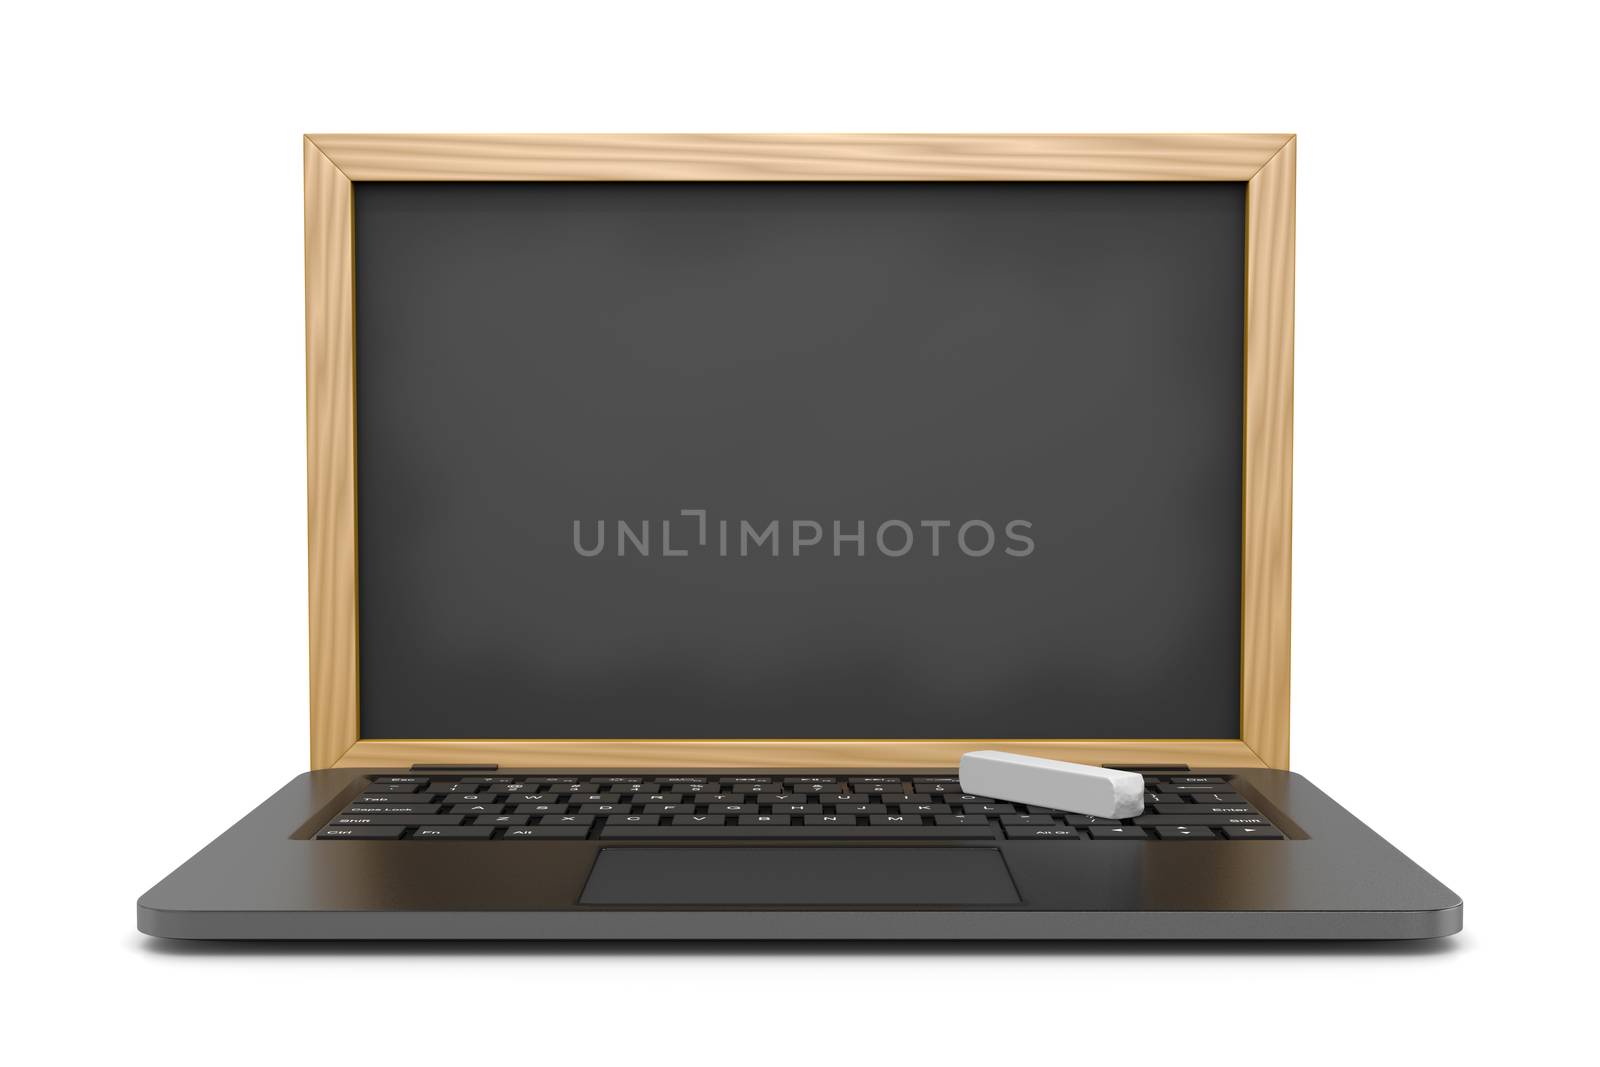 Laptop Computer with a Blank Blackboard Instead of the Display 3D Illustration on White, E-learning Concept